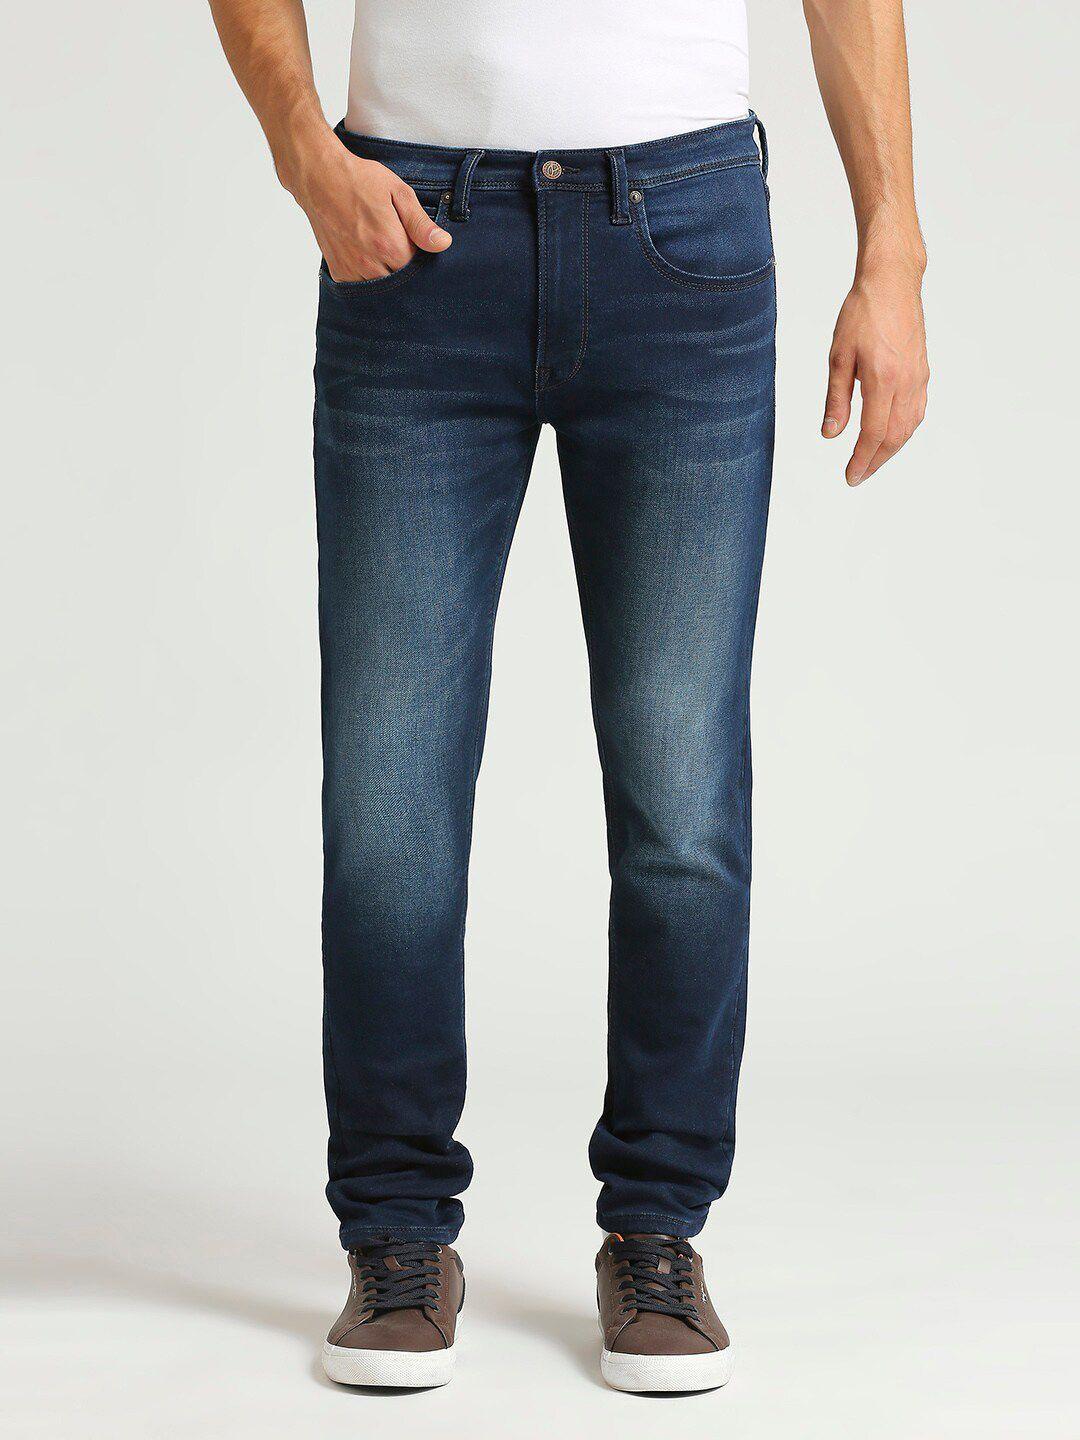 pepe jeans men skinny fit clean look stretchable jeans